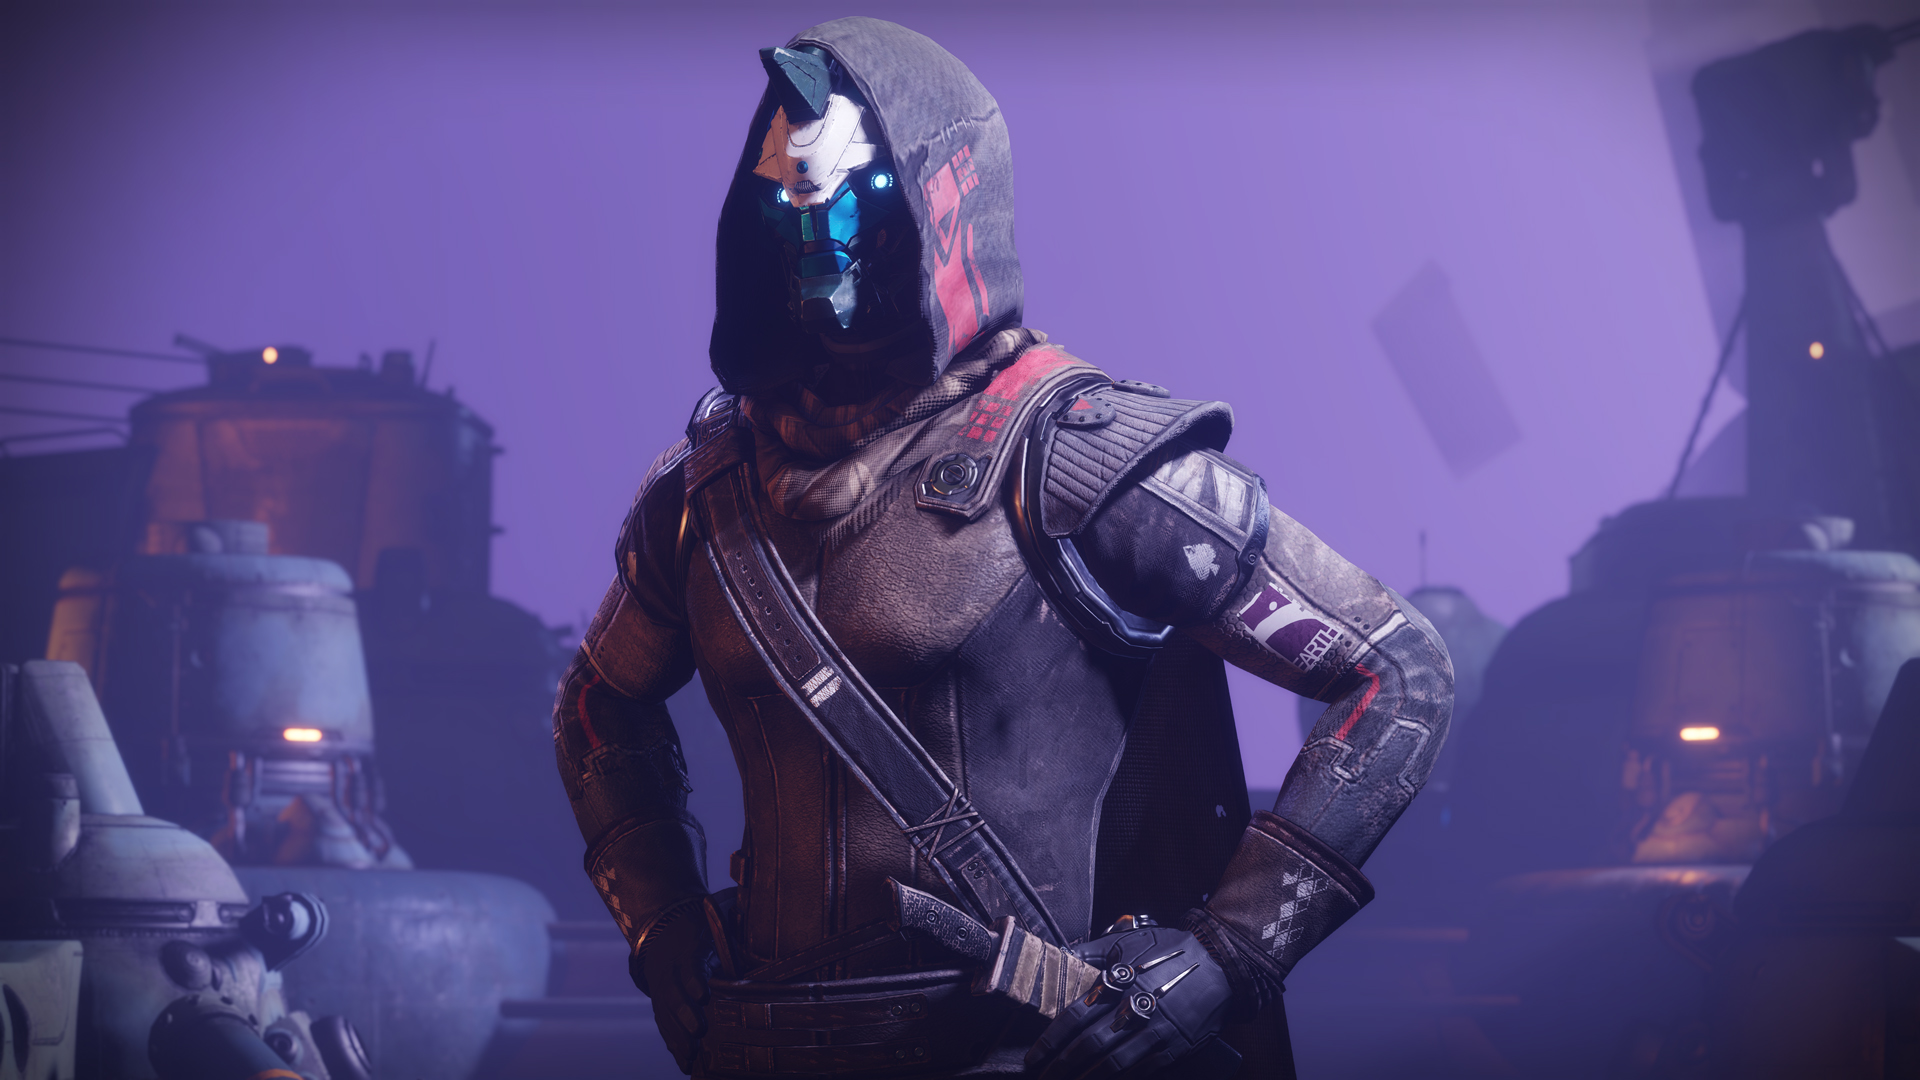 Destiny 2’s Latest Cinematic Trailer Shows Cayde-6’s Final Stand.